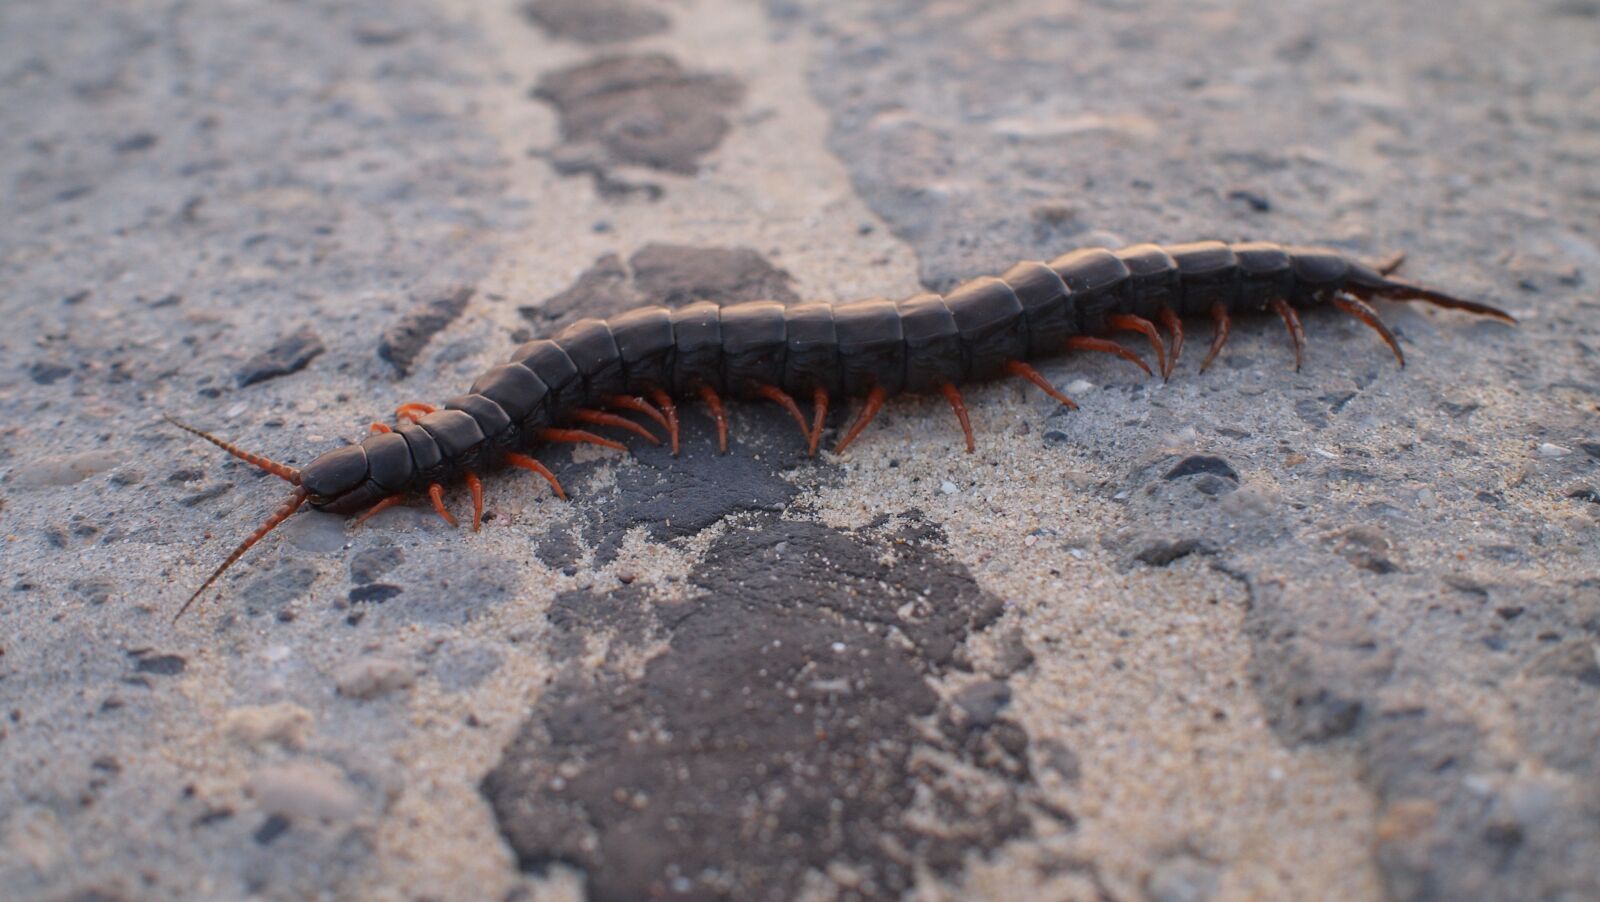 Olympus PEN E-P1 sample photo. Centipede, insects, home centipede photography